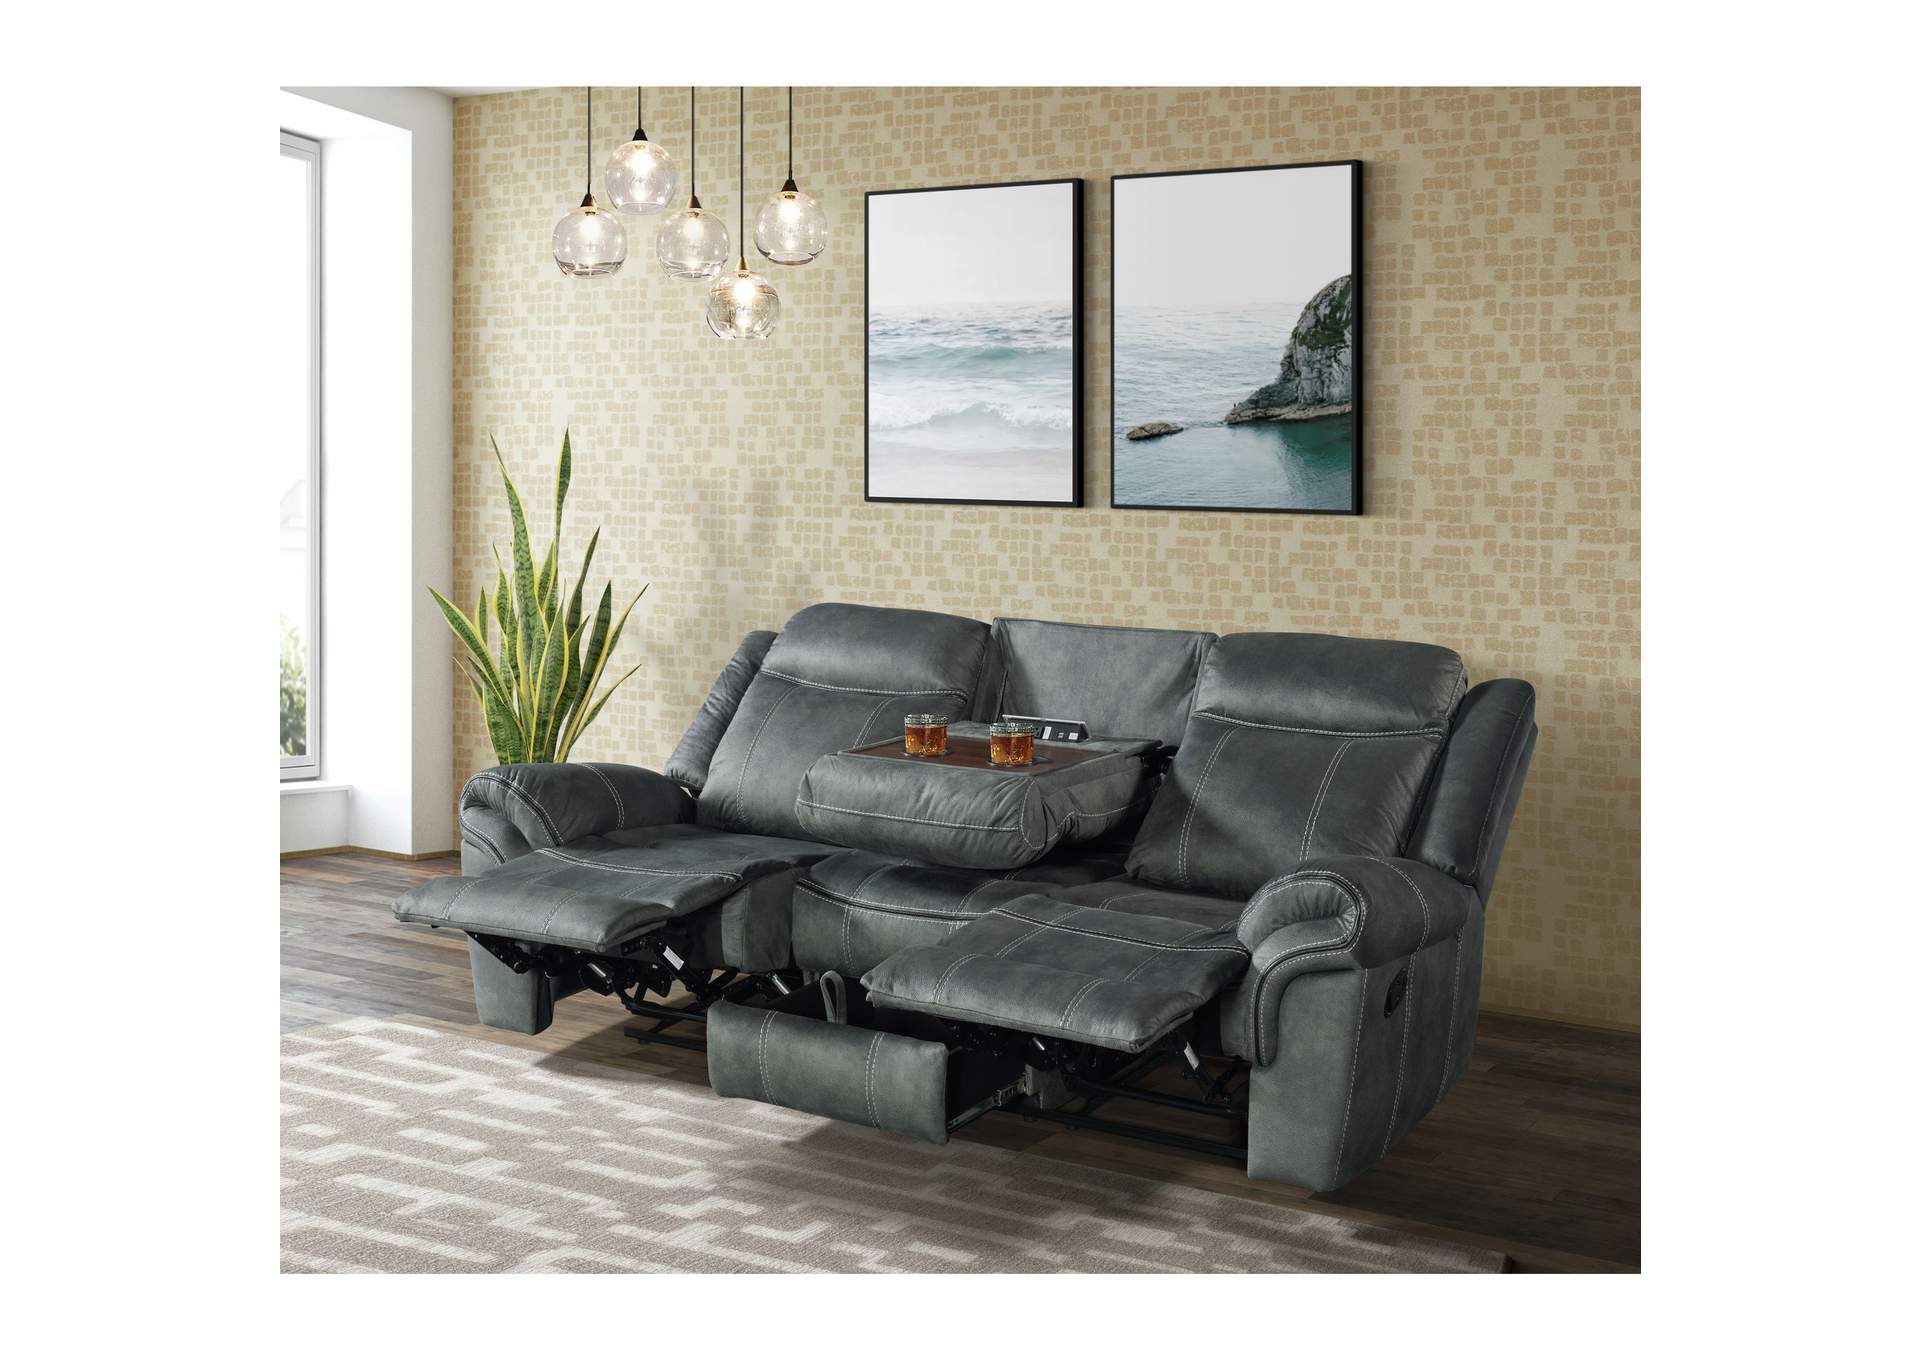 Sorrento Motion Sofa With Dropdown In Fb367 Charcoal,Elements